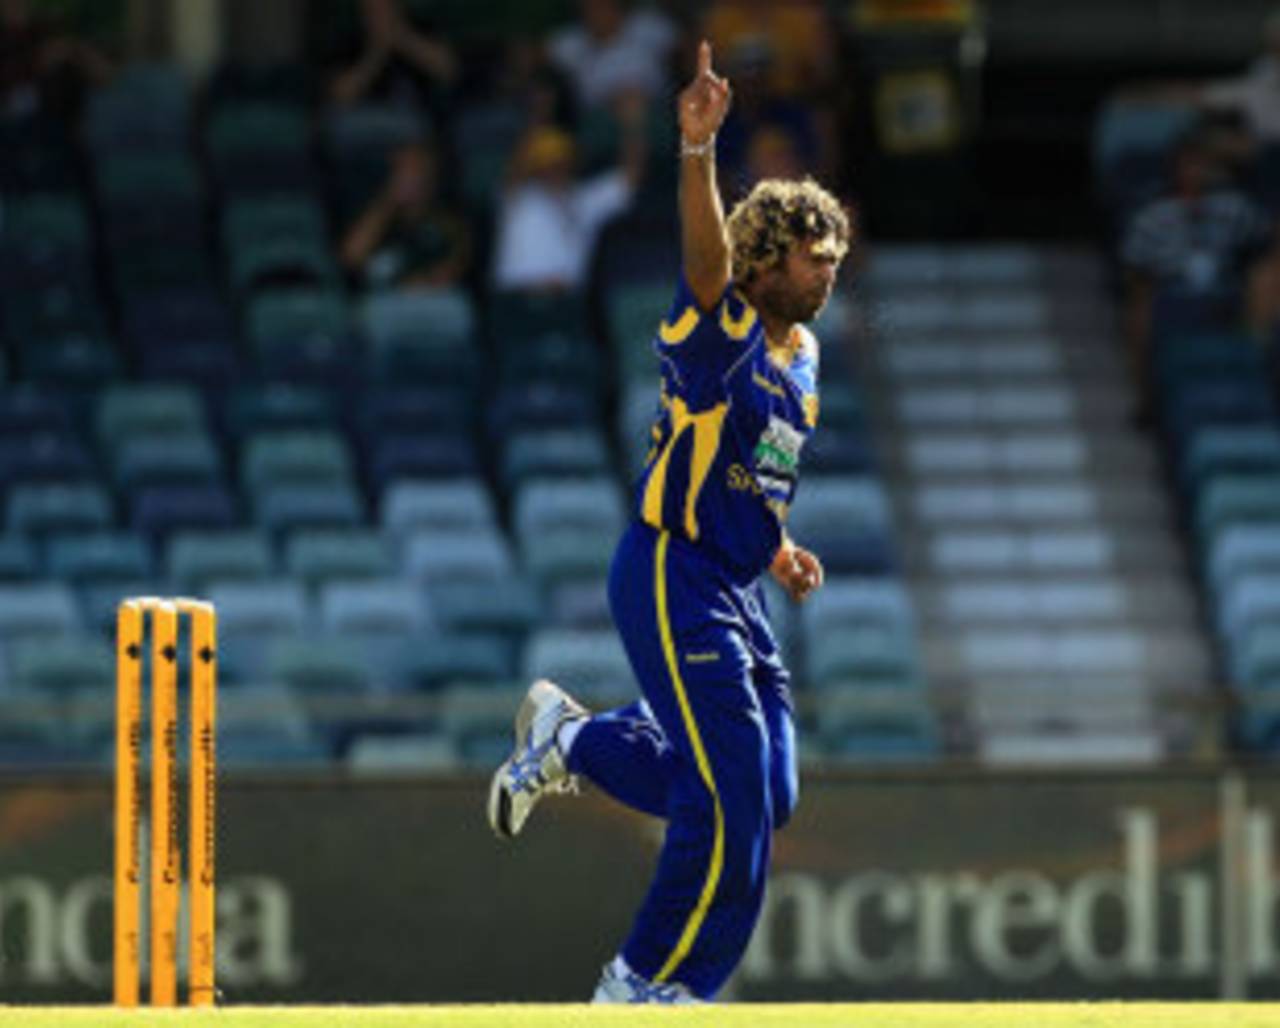 Lasith Malinga could be crushing toes in county cricket this season&nbsp;&nbsp;&bull;&nbsp;&nbsp;Getty Images